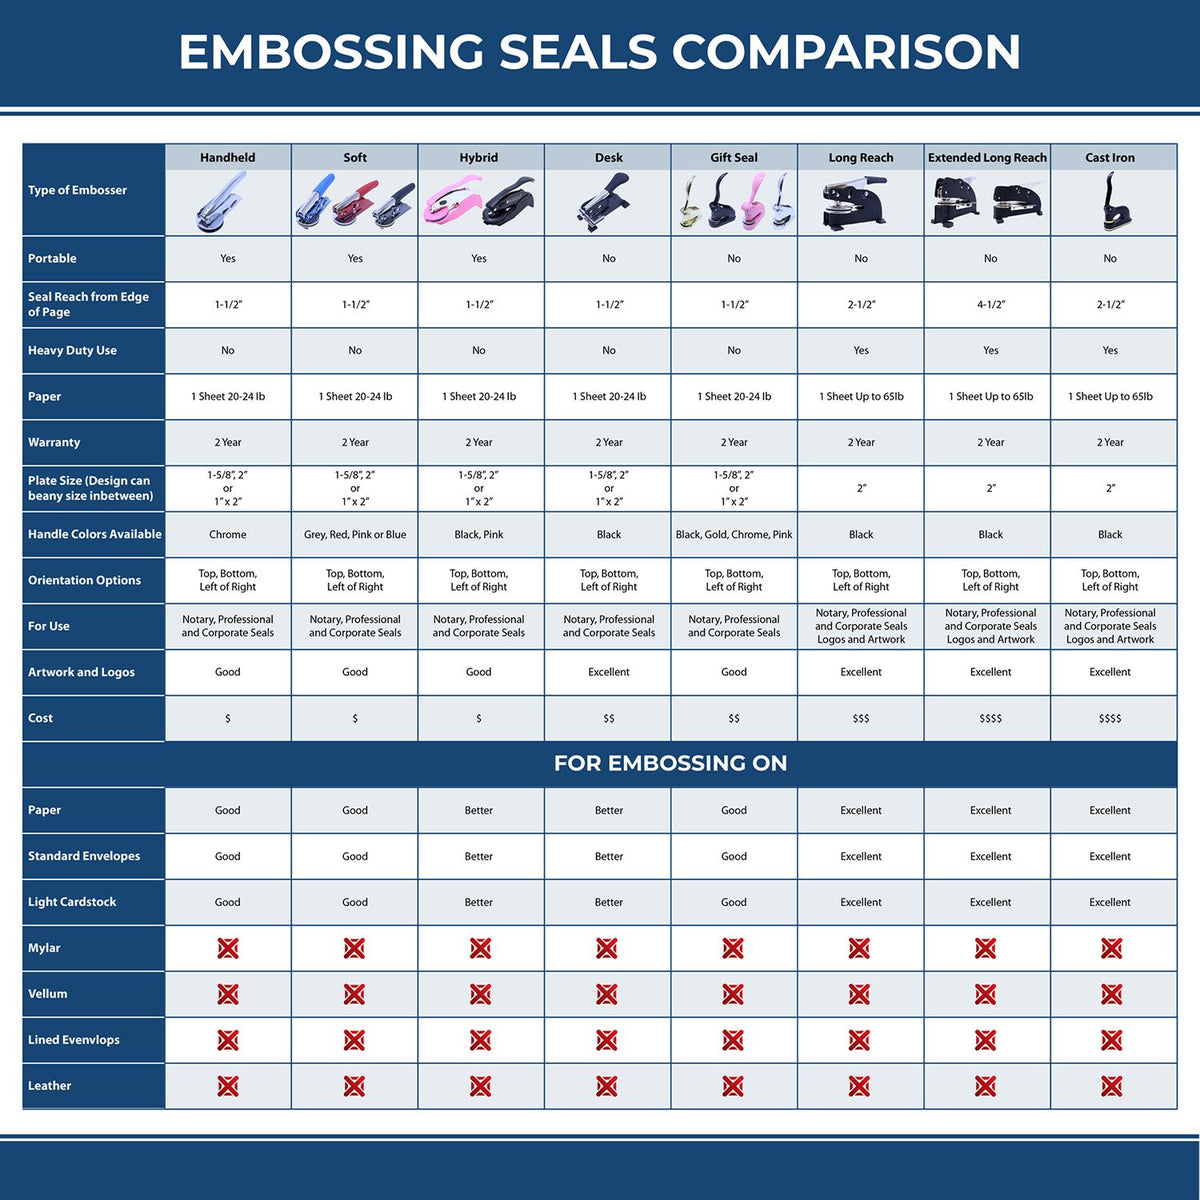 A comparison chart for the different types of mount models available for the Soft Oklahoma Professional Geologist Seal